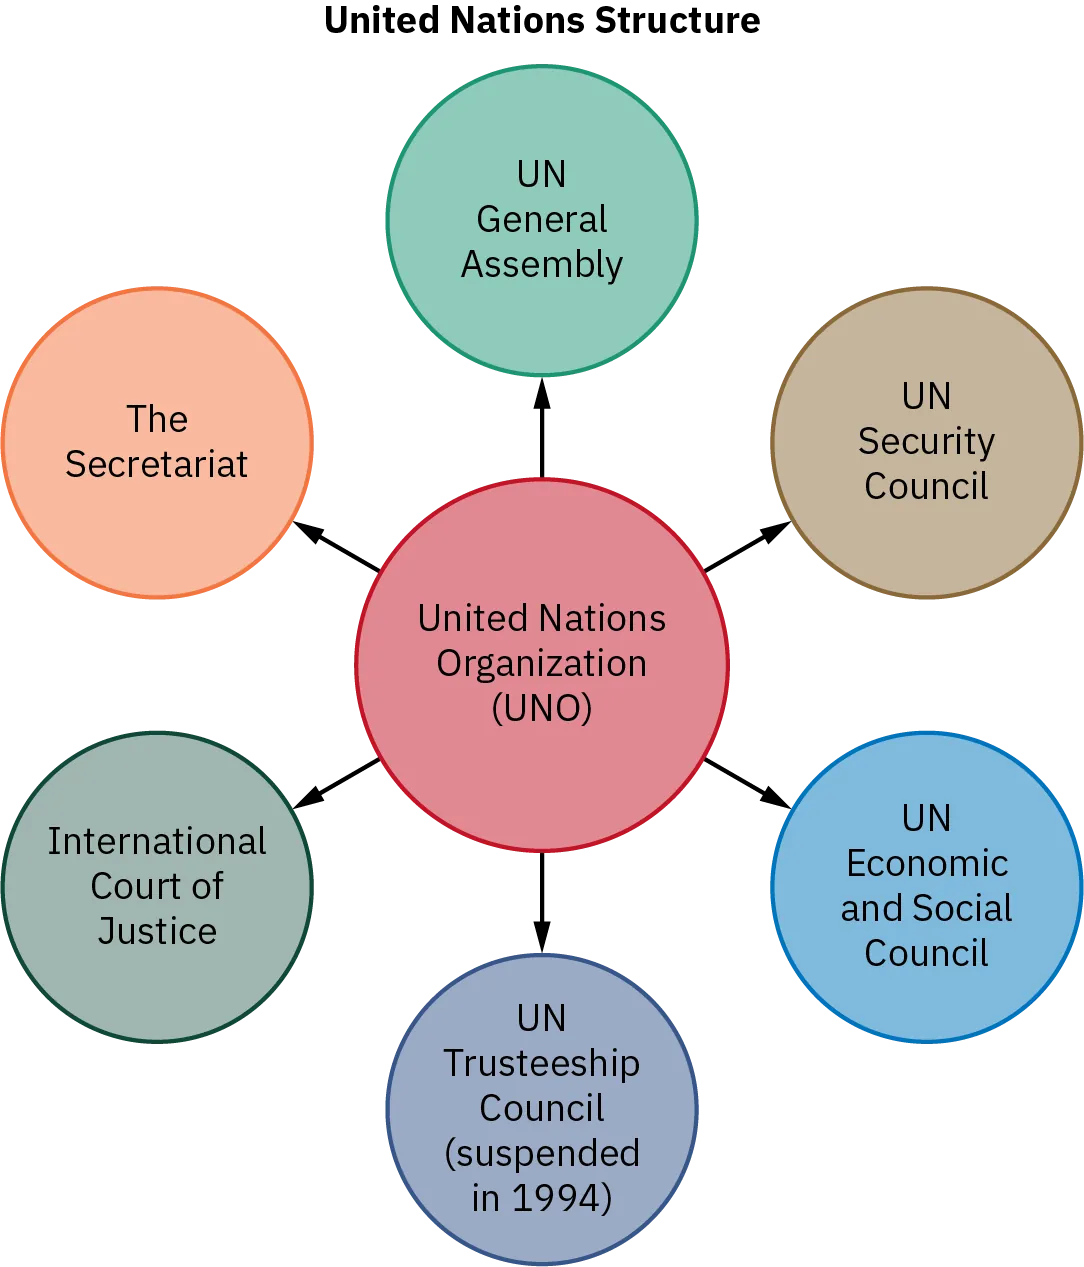 An organizer shows the main bodies of the United Nations: the General Assembly, the Security Council, the Economic and Social Council, the Trusteeship Council, the International Court of Justice, and the Secretariat. The Trusteeship Council was suspended in 1994.